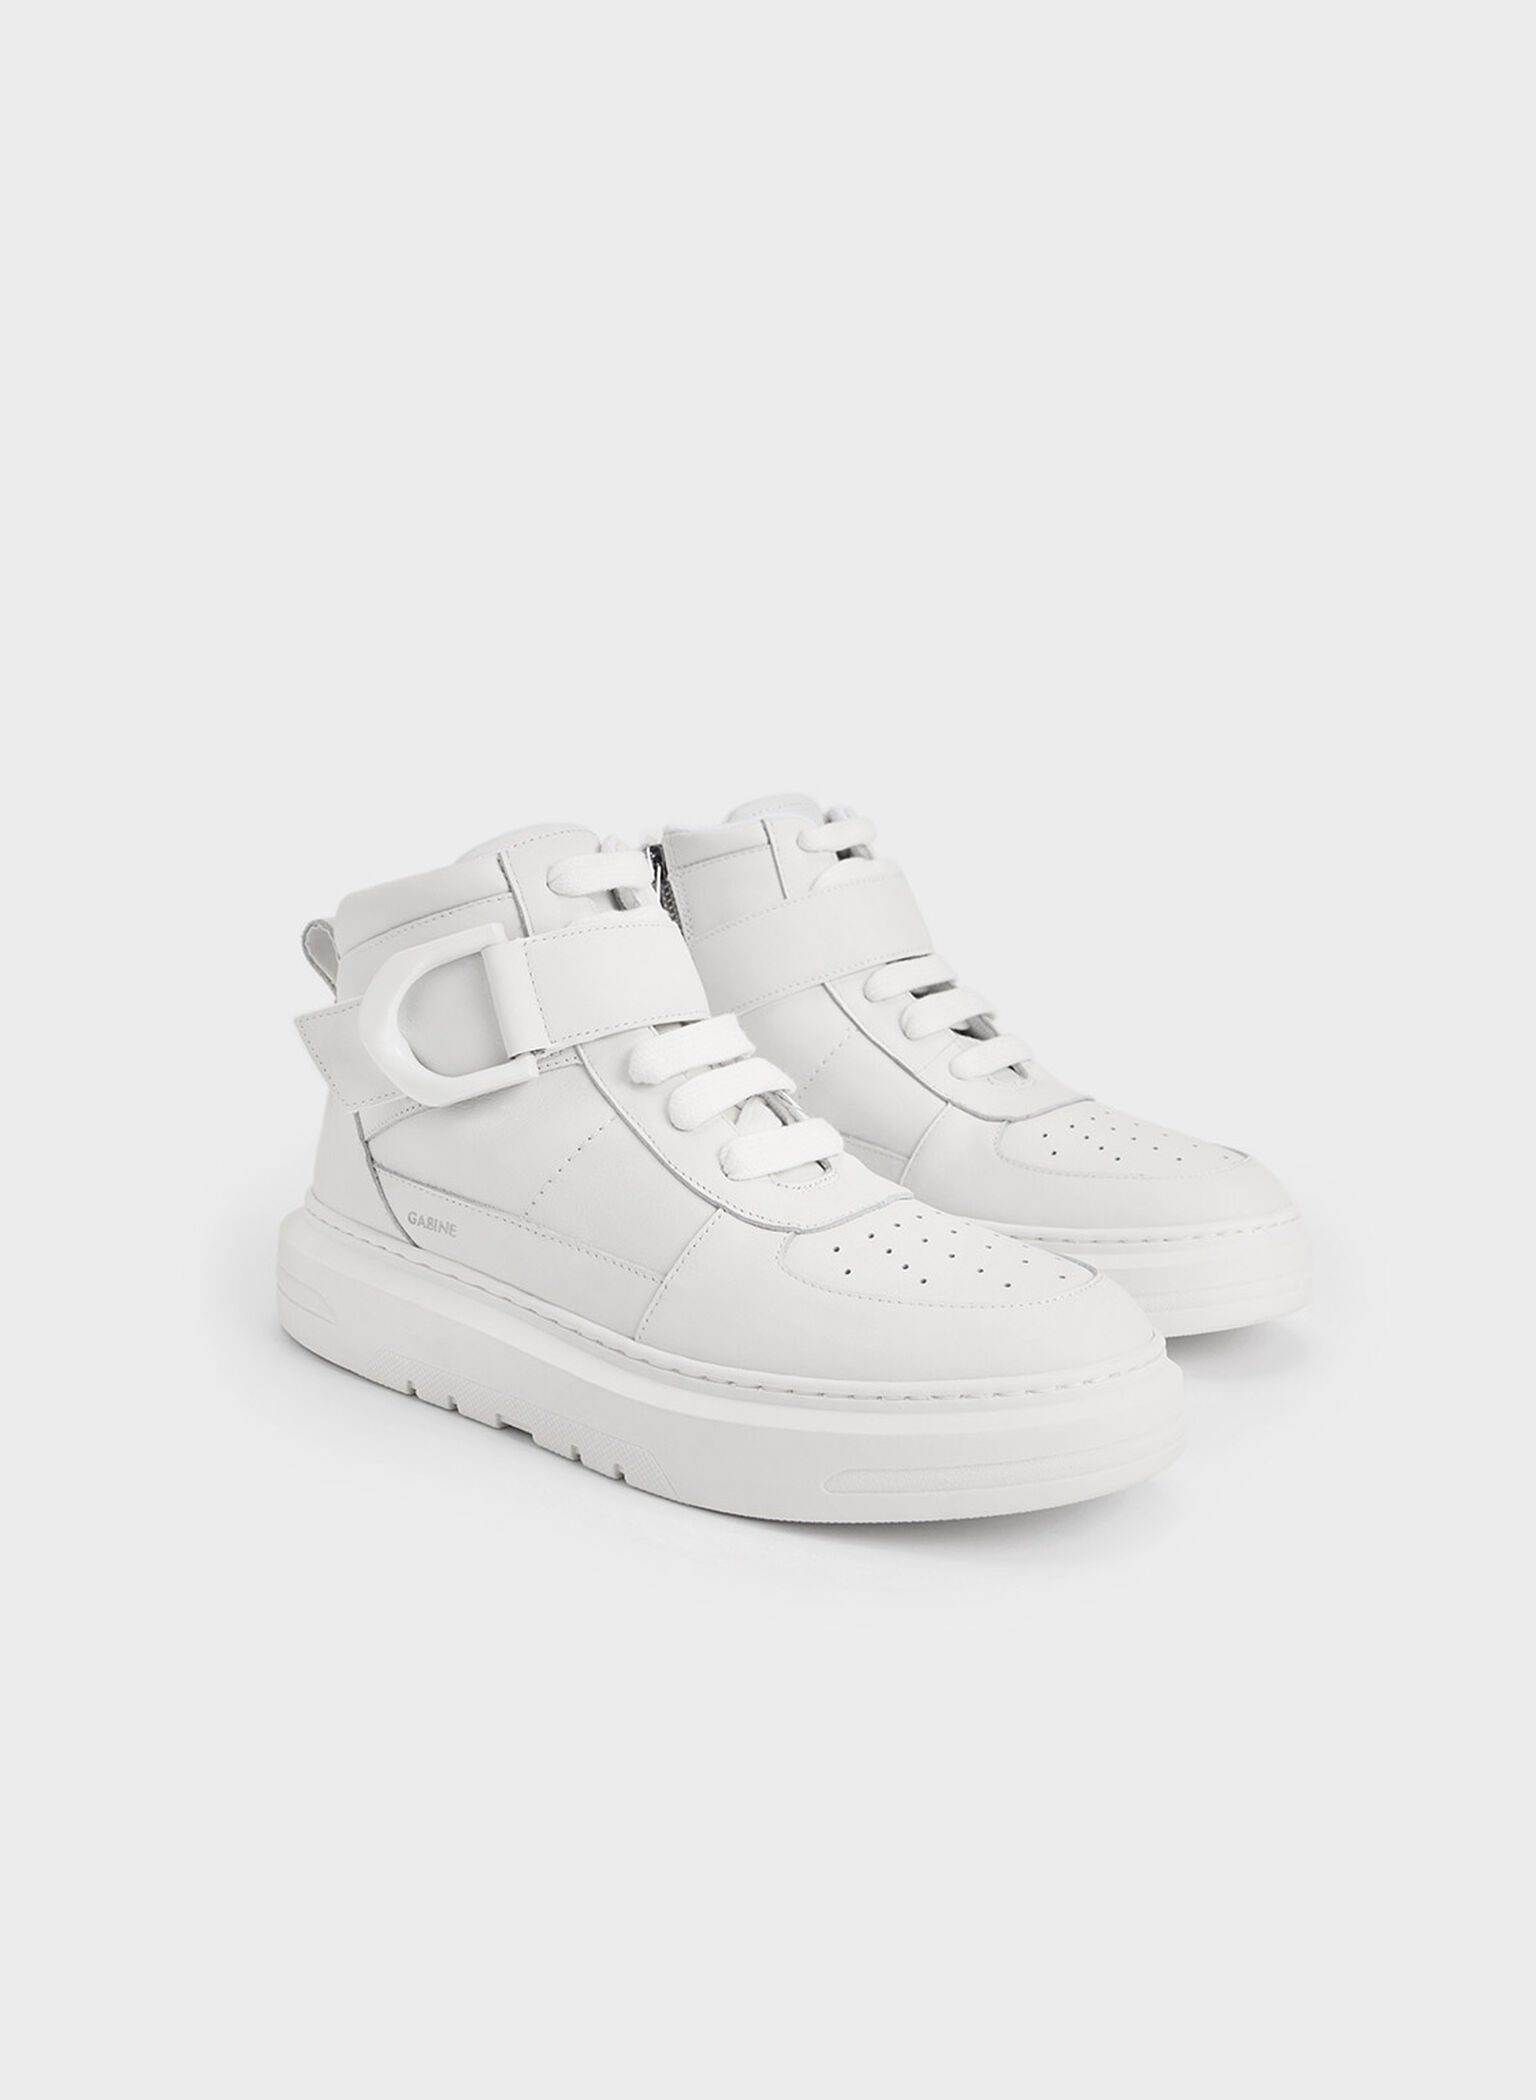 Gabine Leather High-Top Sneakers, White, hi-res